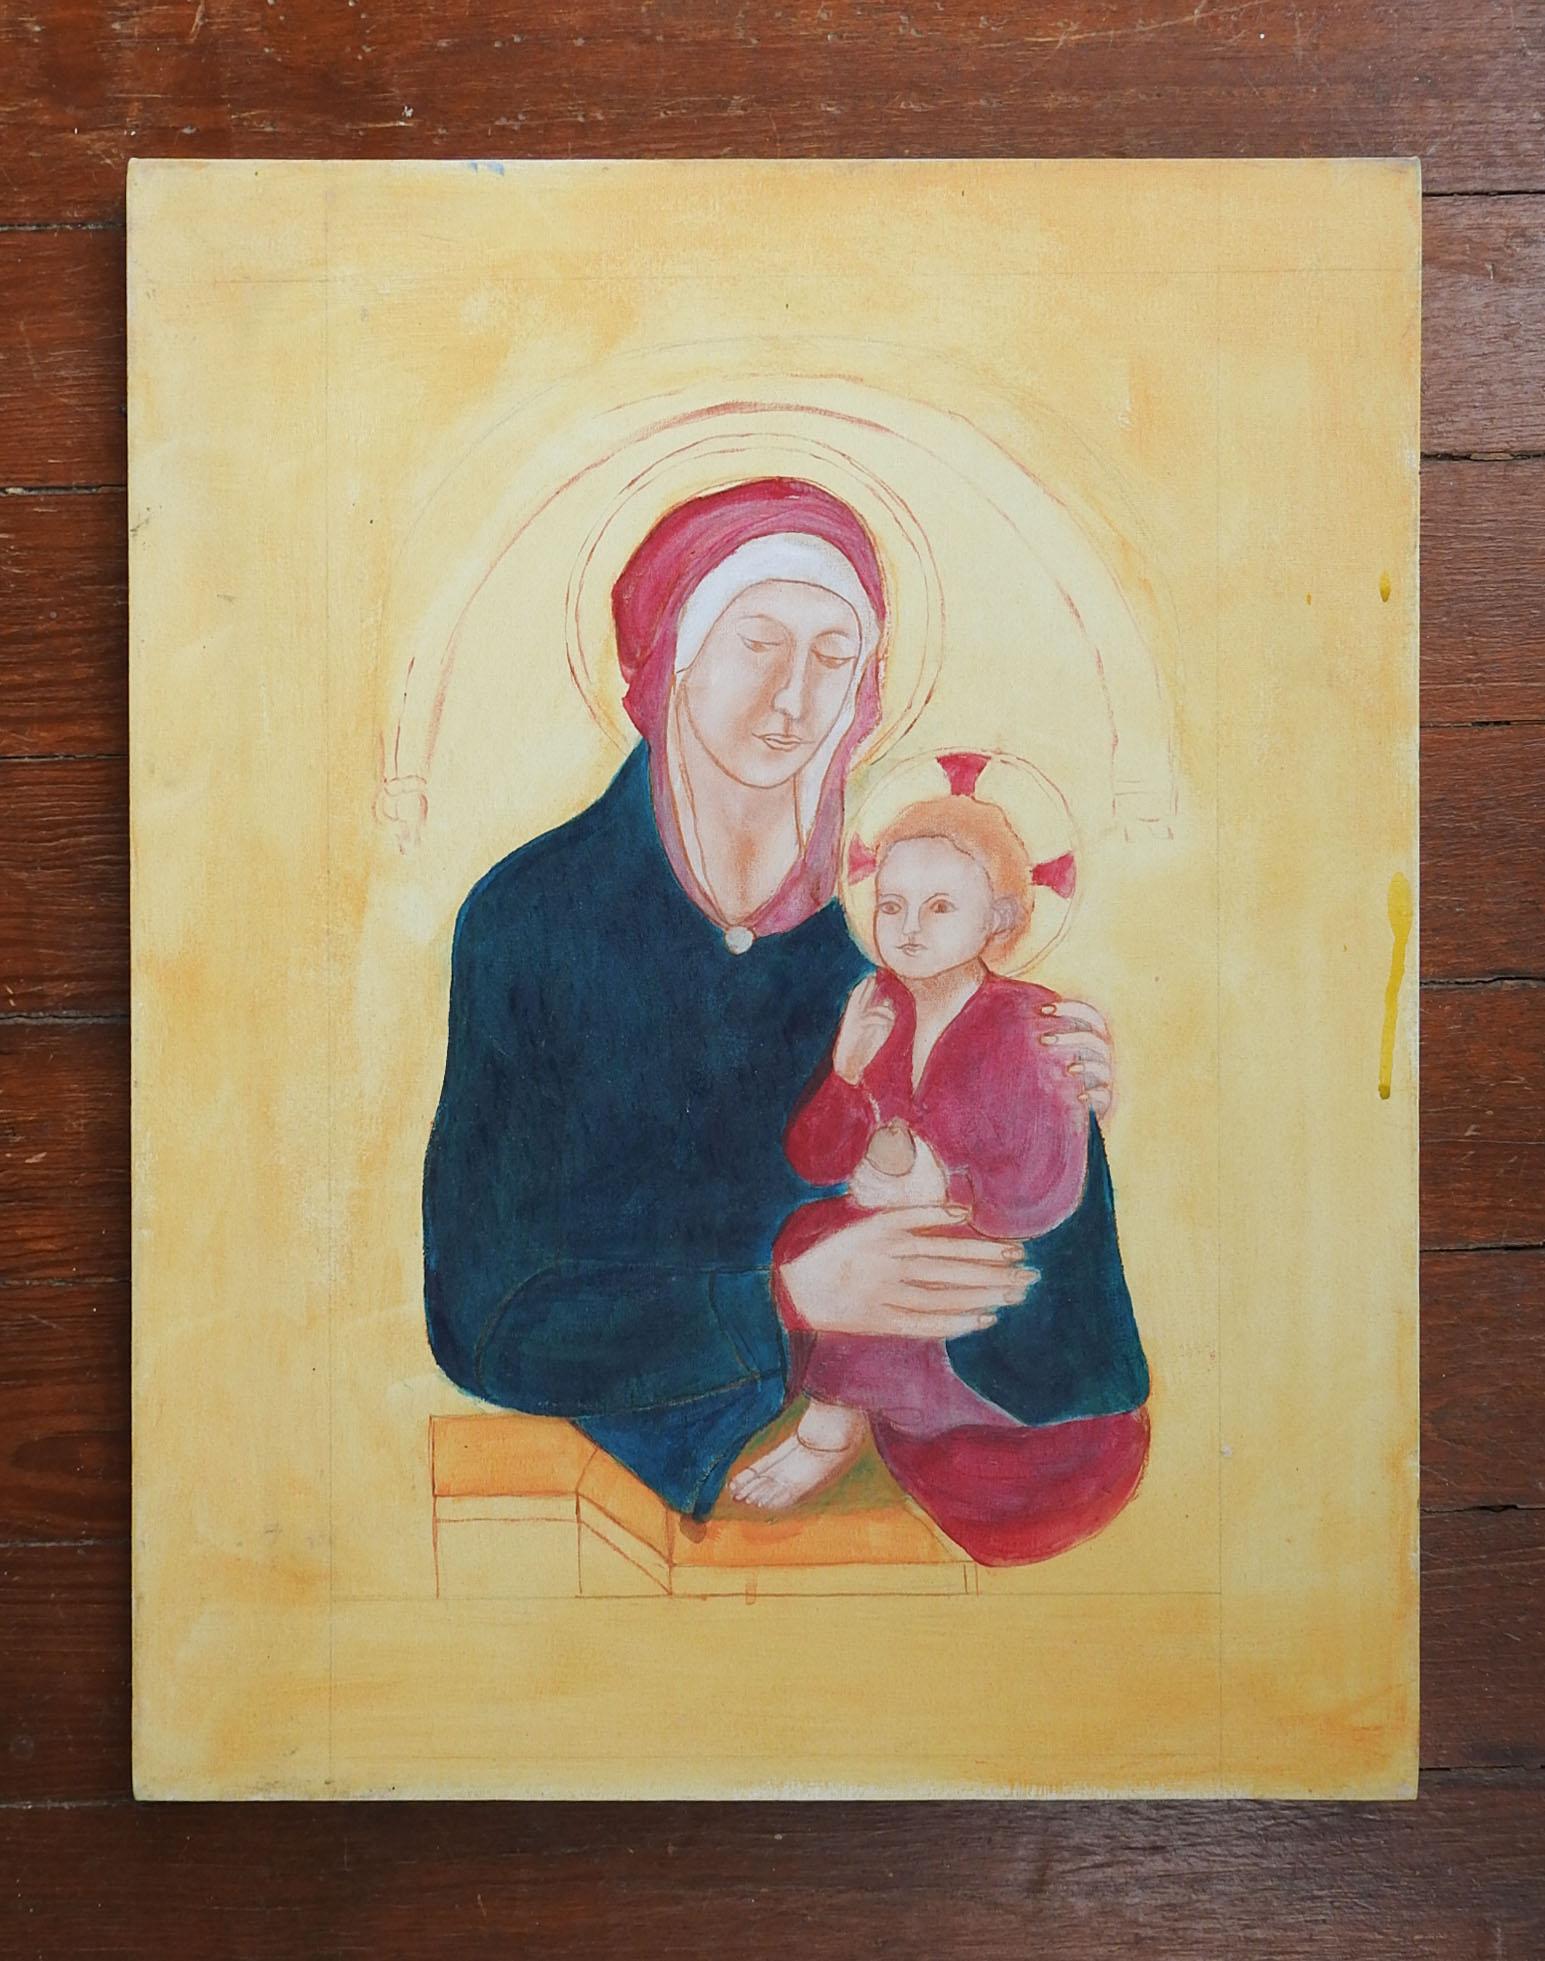 Oil on canvas painting of Madonna and child by Rebecca de leon Almazon (1935-2018) Texas.  Unsigned, from the artists estate, likely unfinished.  Unframed.